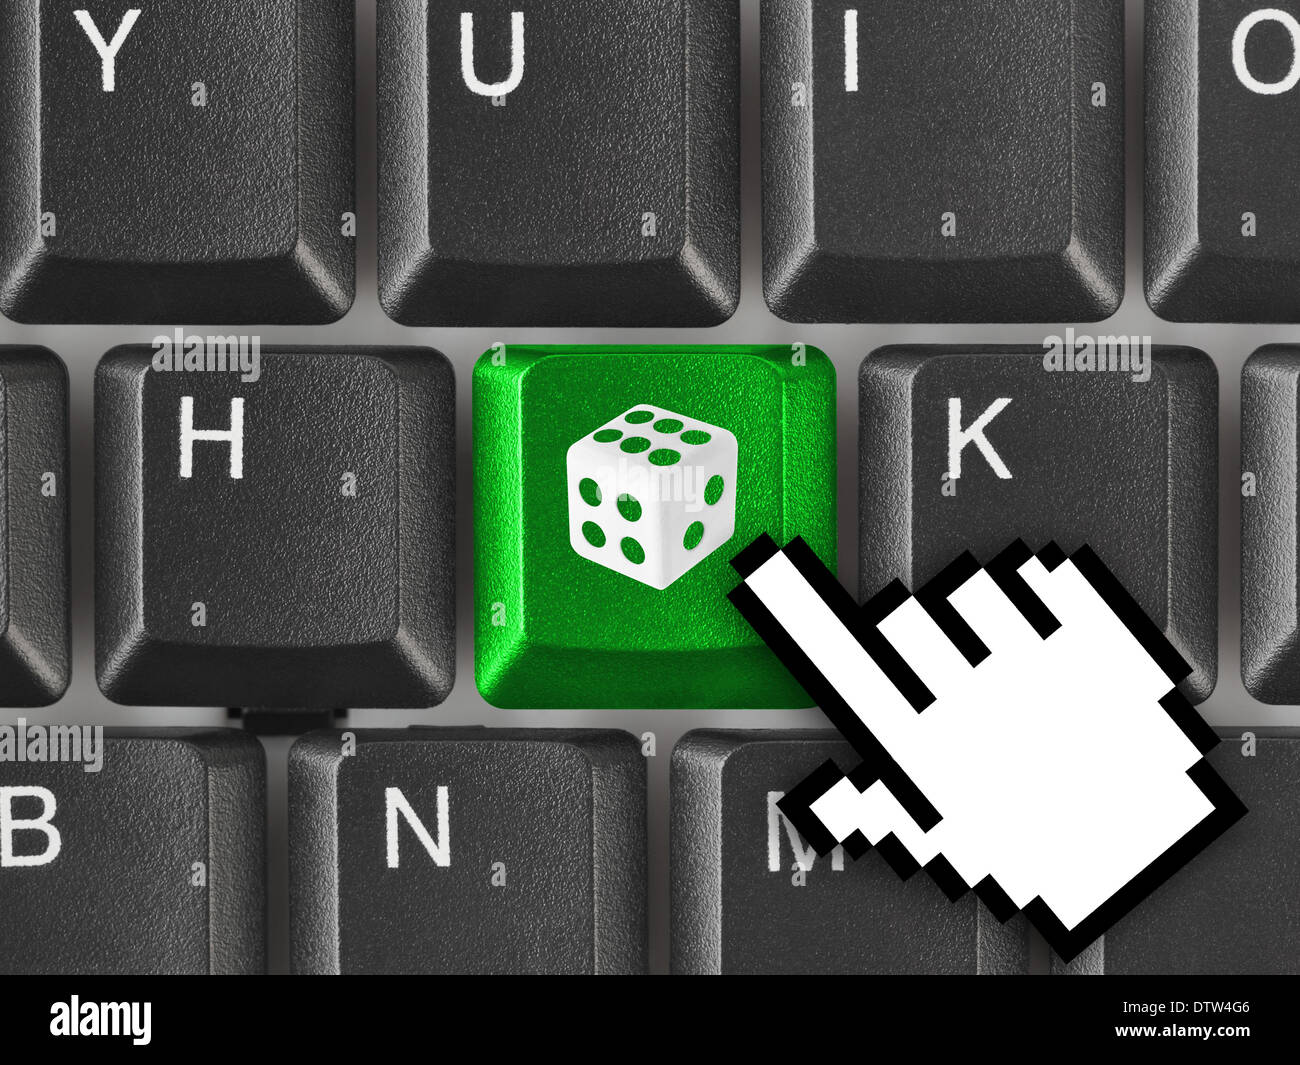 Computer keyboard with dice key Stock Photo